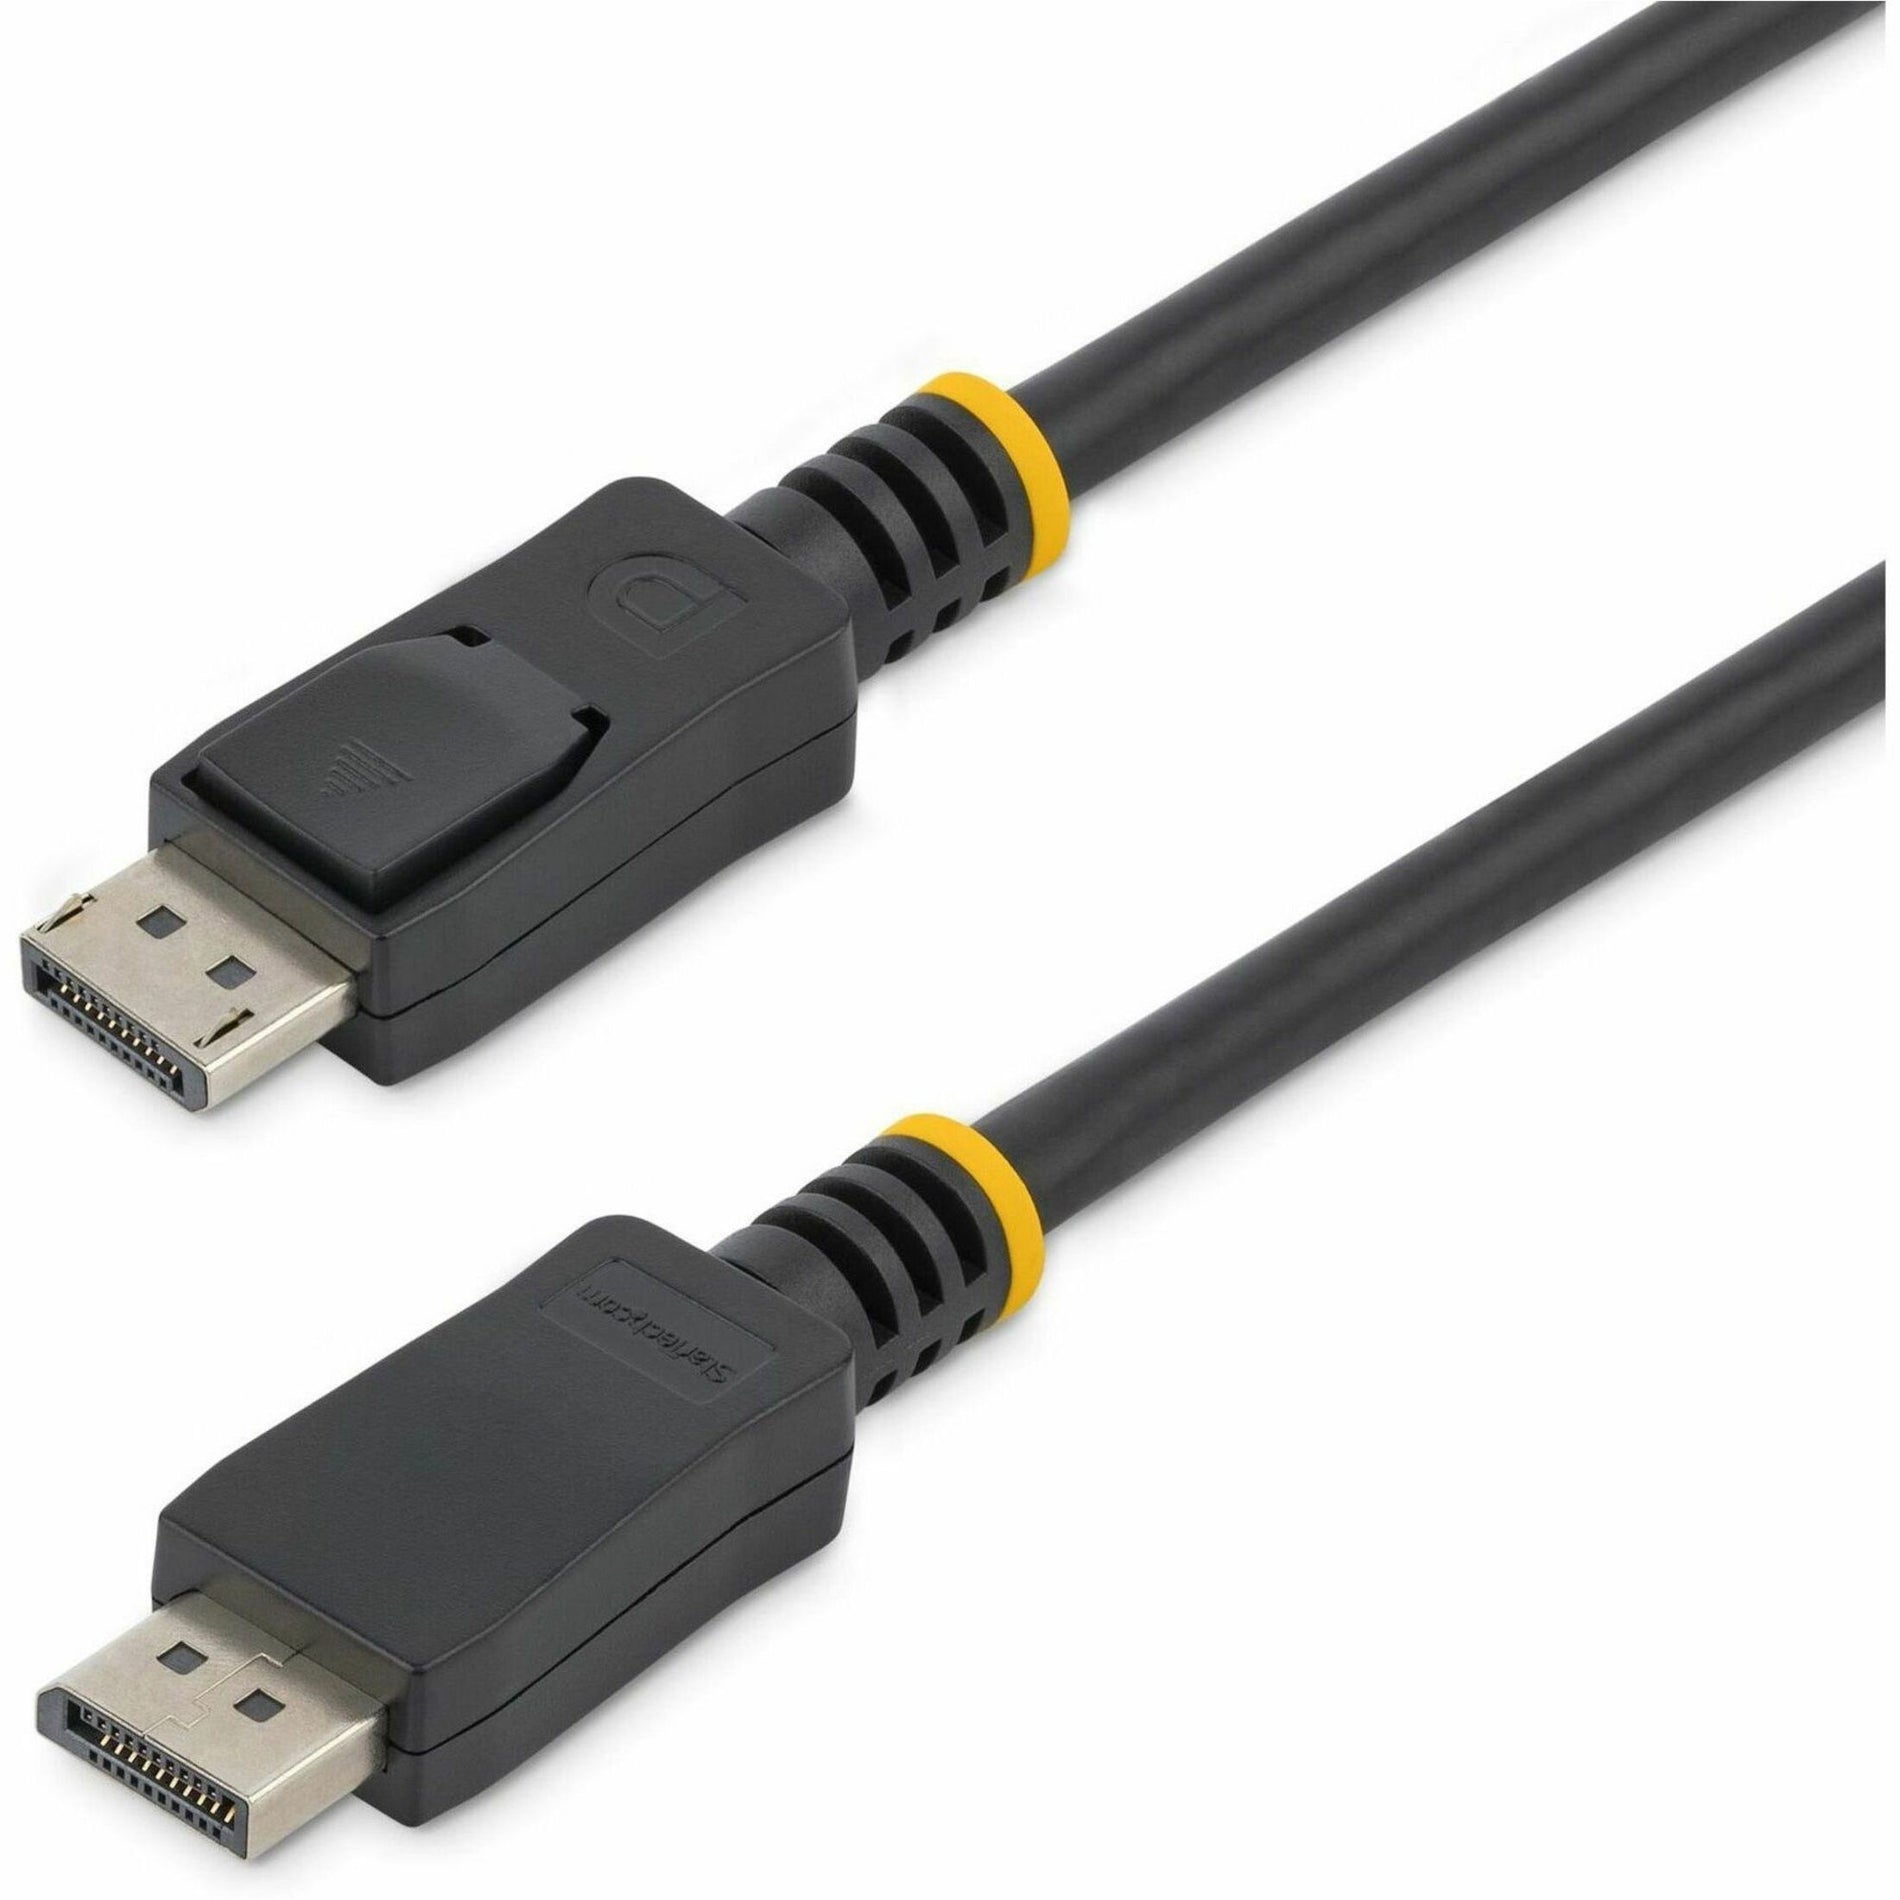 StarTech.com DISPLPORT6L DisplayPort Cable - 6 ft / 2m - 4K DisplayPort 1.2 Cable, High-Speed Video Cable for Projector, Monitor, Notebook, and More